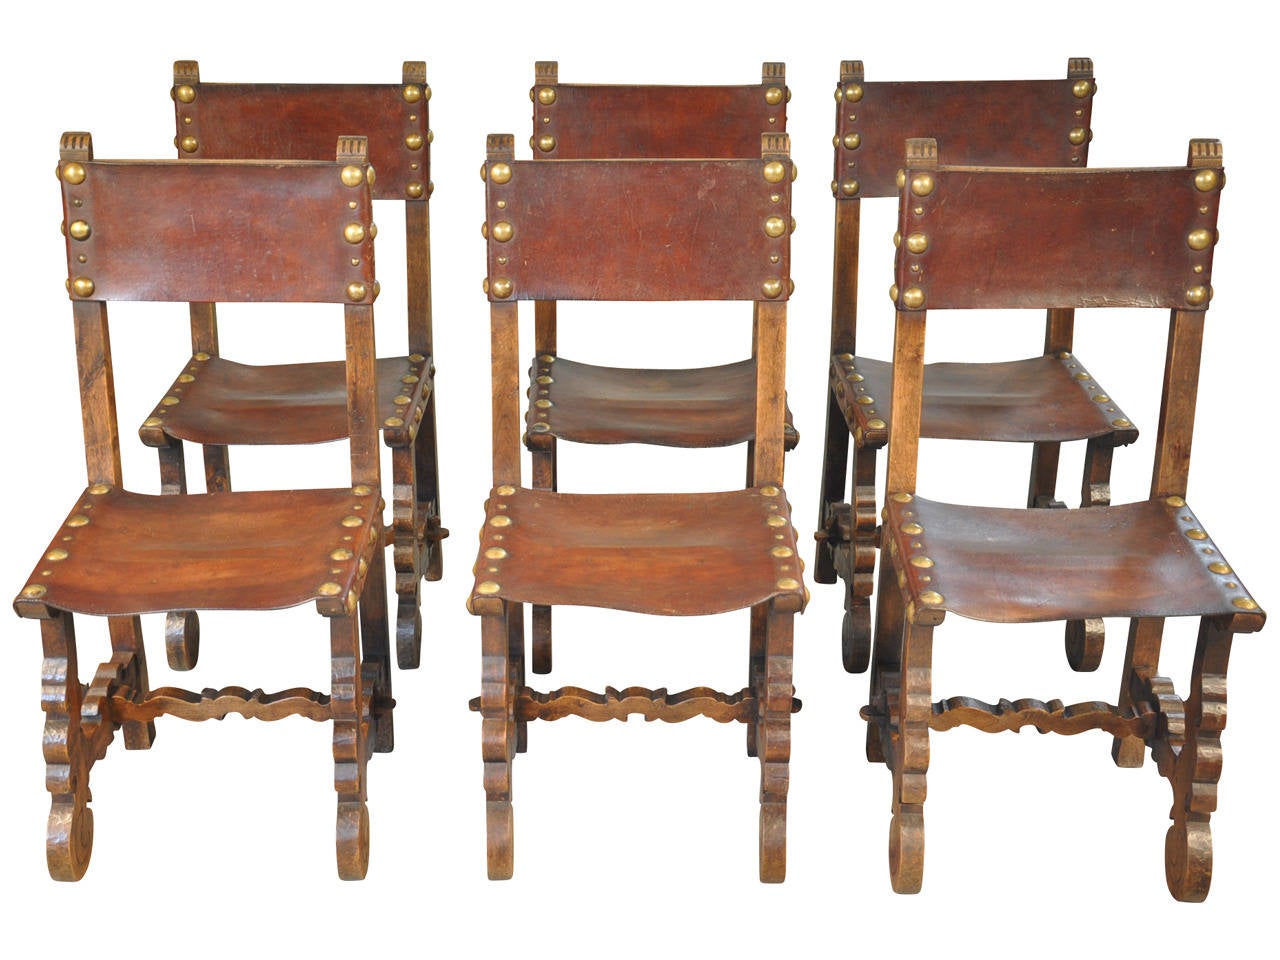 A set of 6 Spanish leather dining chairs in the Baroque style.  Beautifully constructed from walnut with handsome nail head detail.  The leather has a very sumptuous patination.